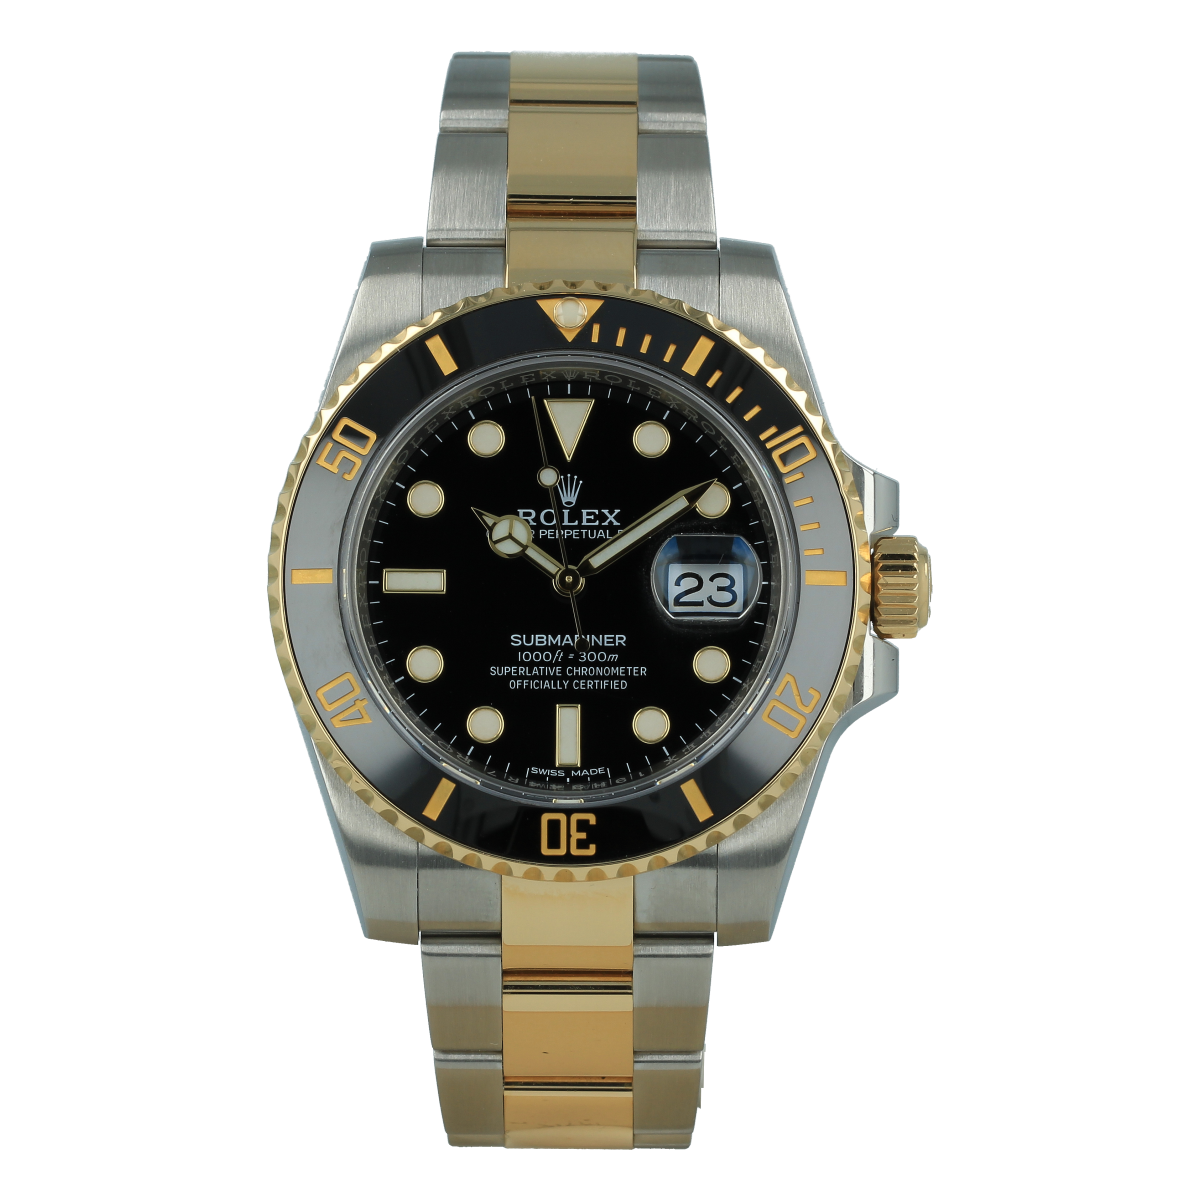 Rolex Submariner Mixto 116613LN Full Set | Buy pre-owned Rolex watch